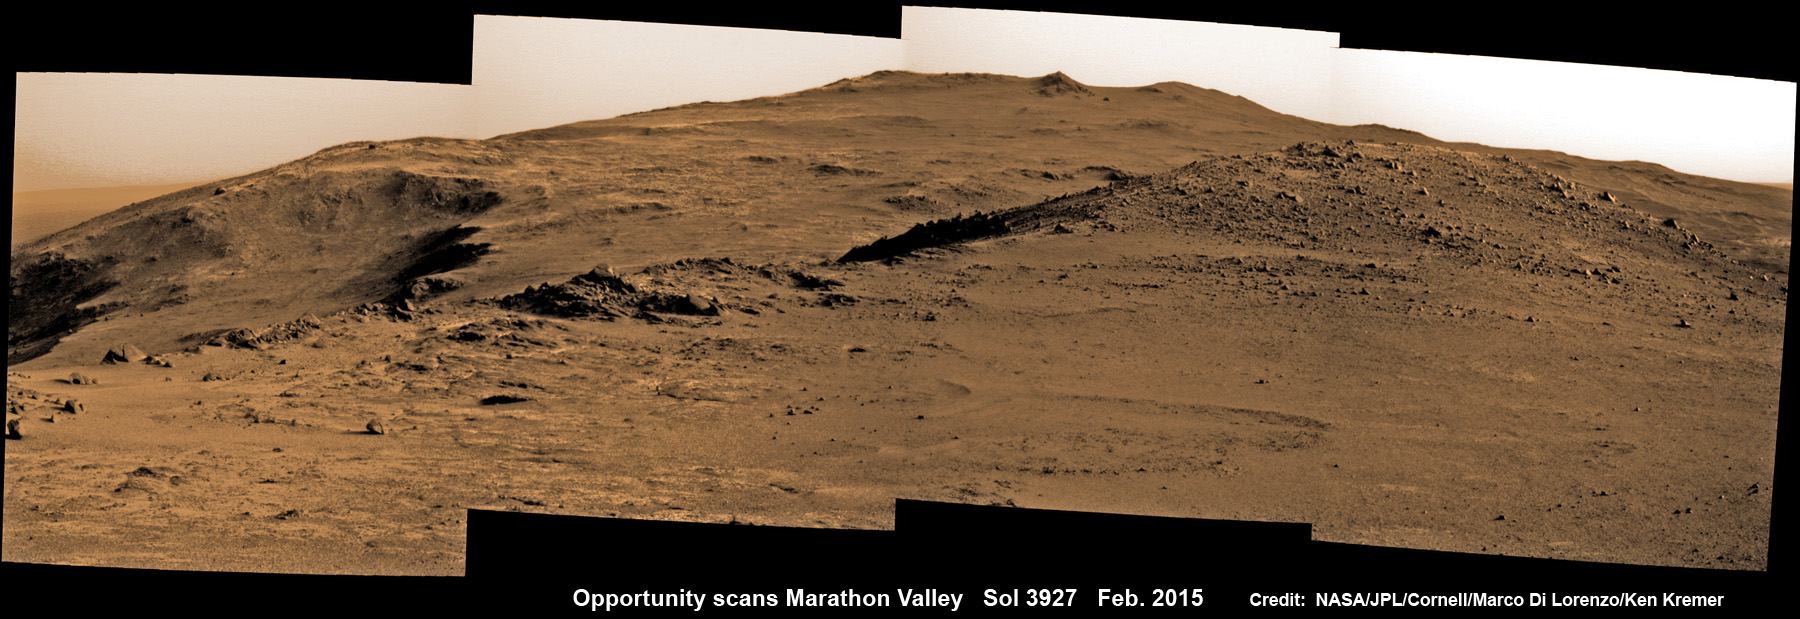 NASA Opportunity Rover look ahead to Marathon Valley and Martian cliffs on Endeavour crater holding deposits of water altered clay minerals science treasure on Feb. 10, 2015.  Rover operates well after 11 Years trekking Mars.   This pancam camera photo mosaic was assembled from images taken on Sol 3927 (Feb. 10, 2015) and colorized.  Credit: NASA/JPL/Cornell/ Marco Di Lorenzo/Ken Kremer/kenkremer.com